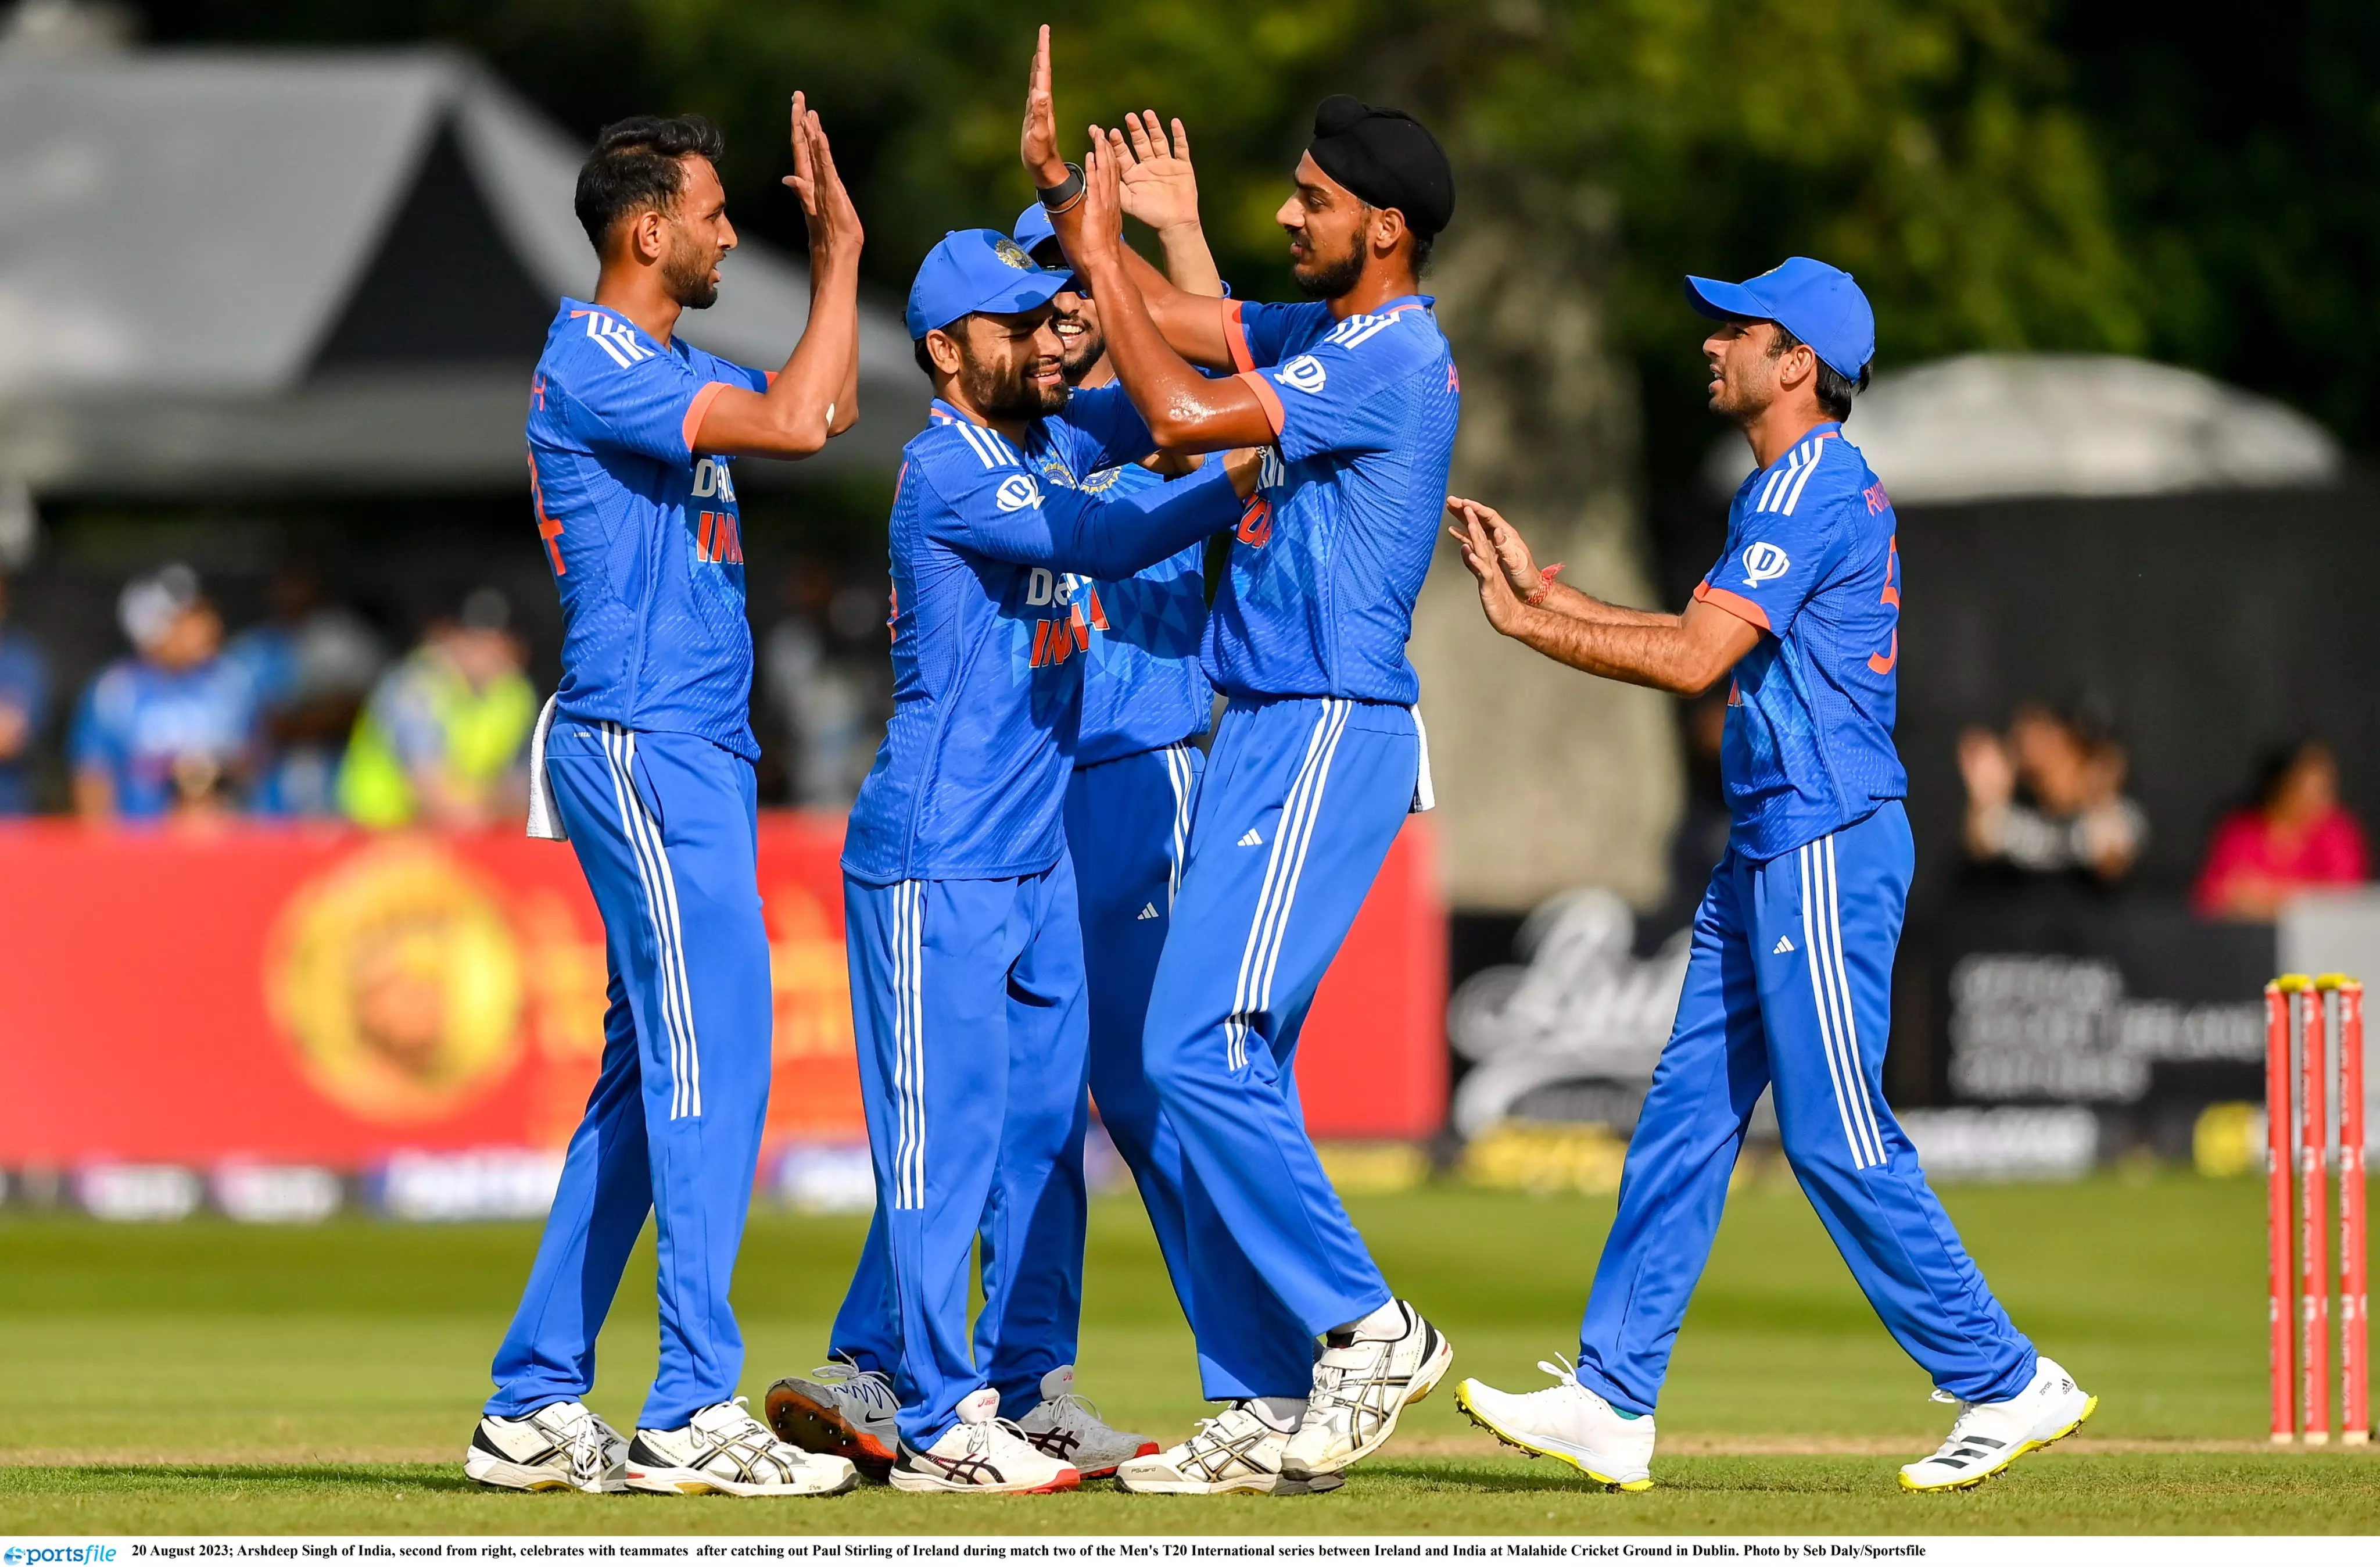 T20I | India beat Ireland by 33 runs to take 2-0 lead in 3-match series